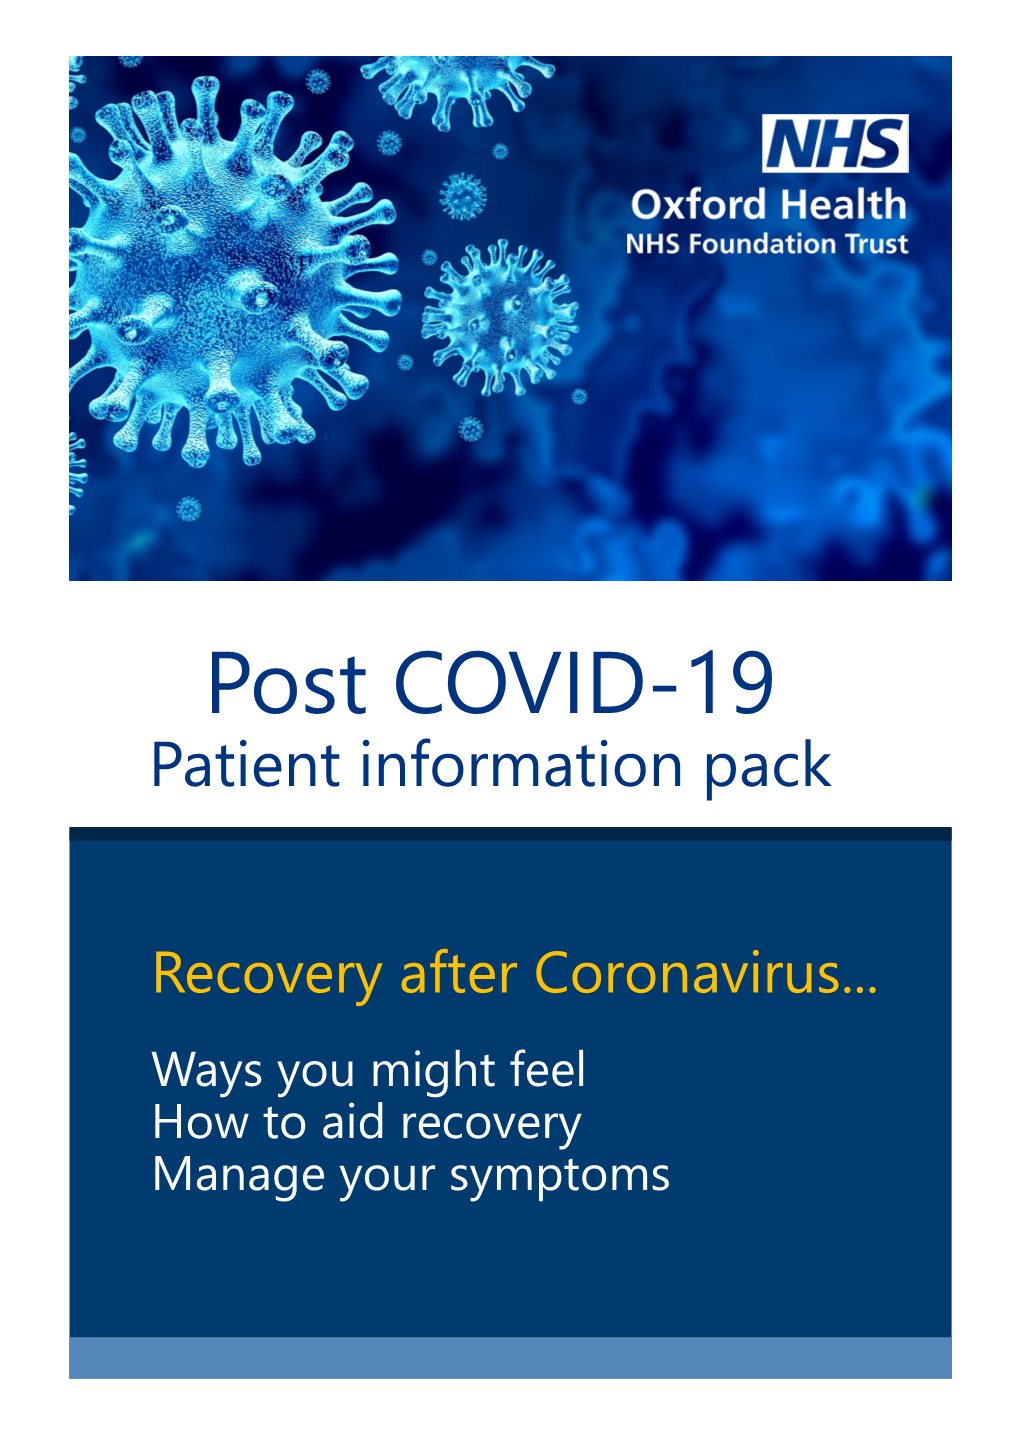 Post COVID-19 Patient Information Pack